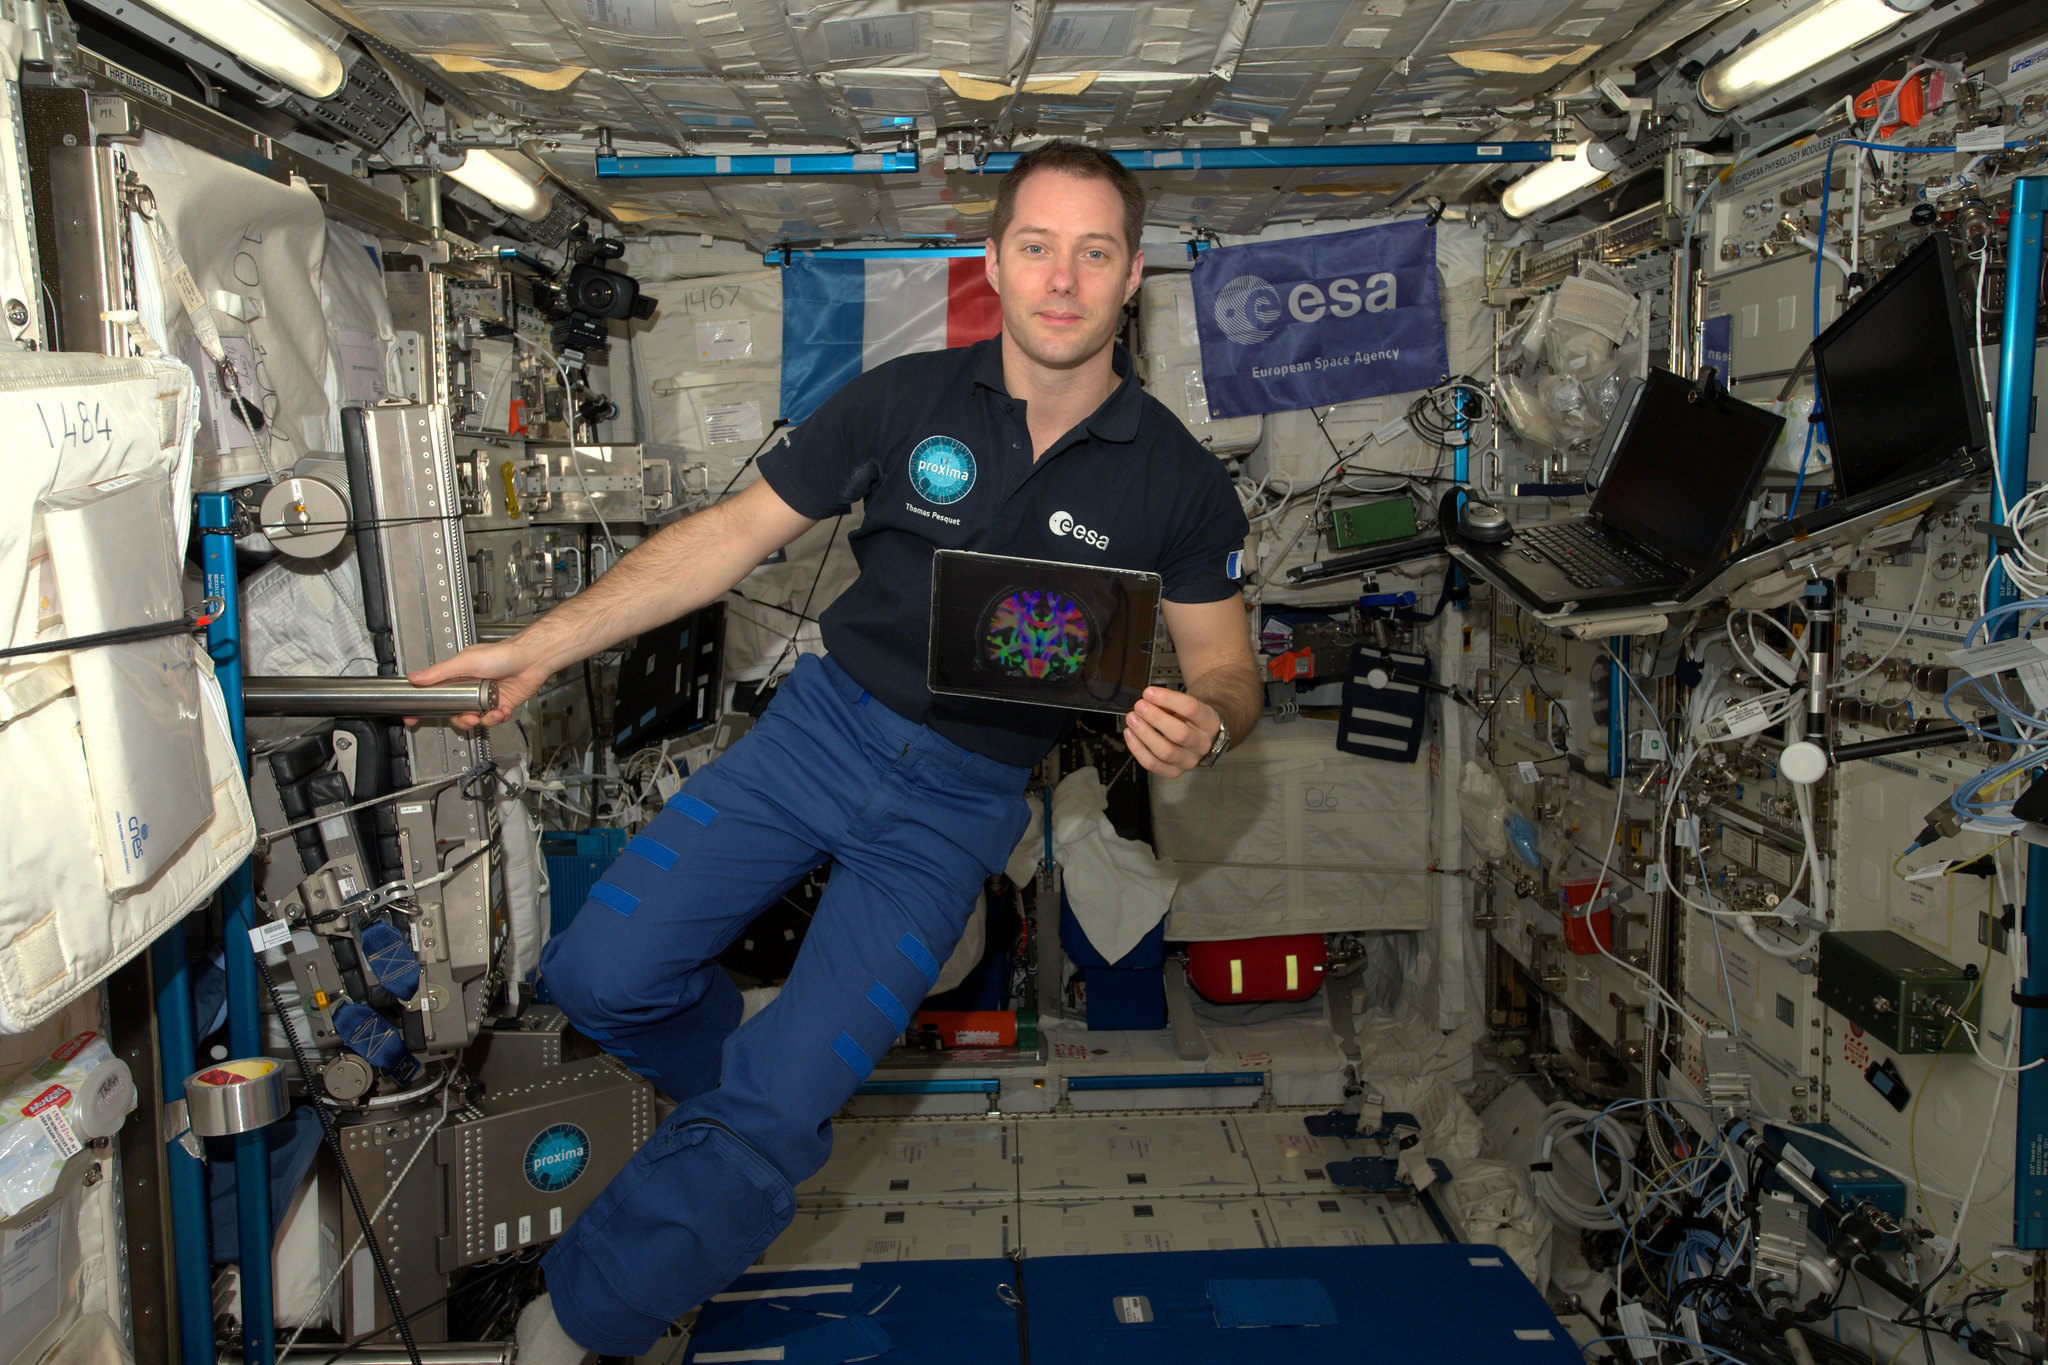 Pesquet is wearing a dark polo shirt with the ESA logo and a pair of light blue pants. He is facing the camera and holding on to a bar extending from a wall of the space station with his right hand. In his left hand is a tablet with a multi-colored image on it. There are ESA and French flags on the station wall behind him and laptops, equipment, and cords covering the wall to his left.